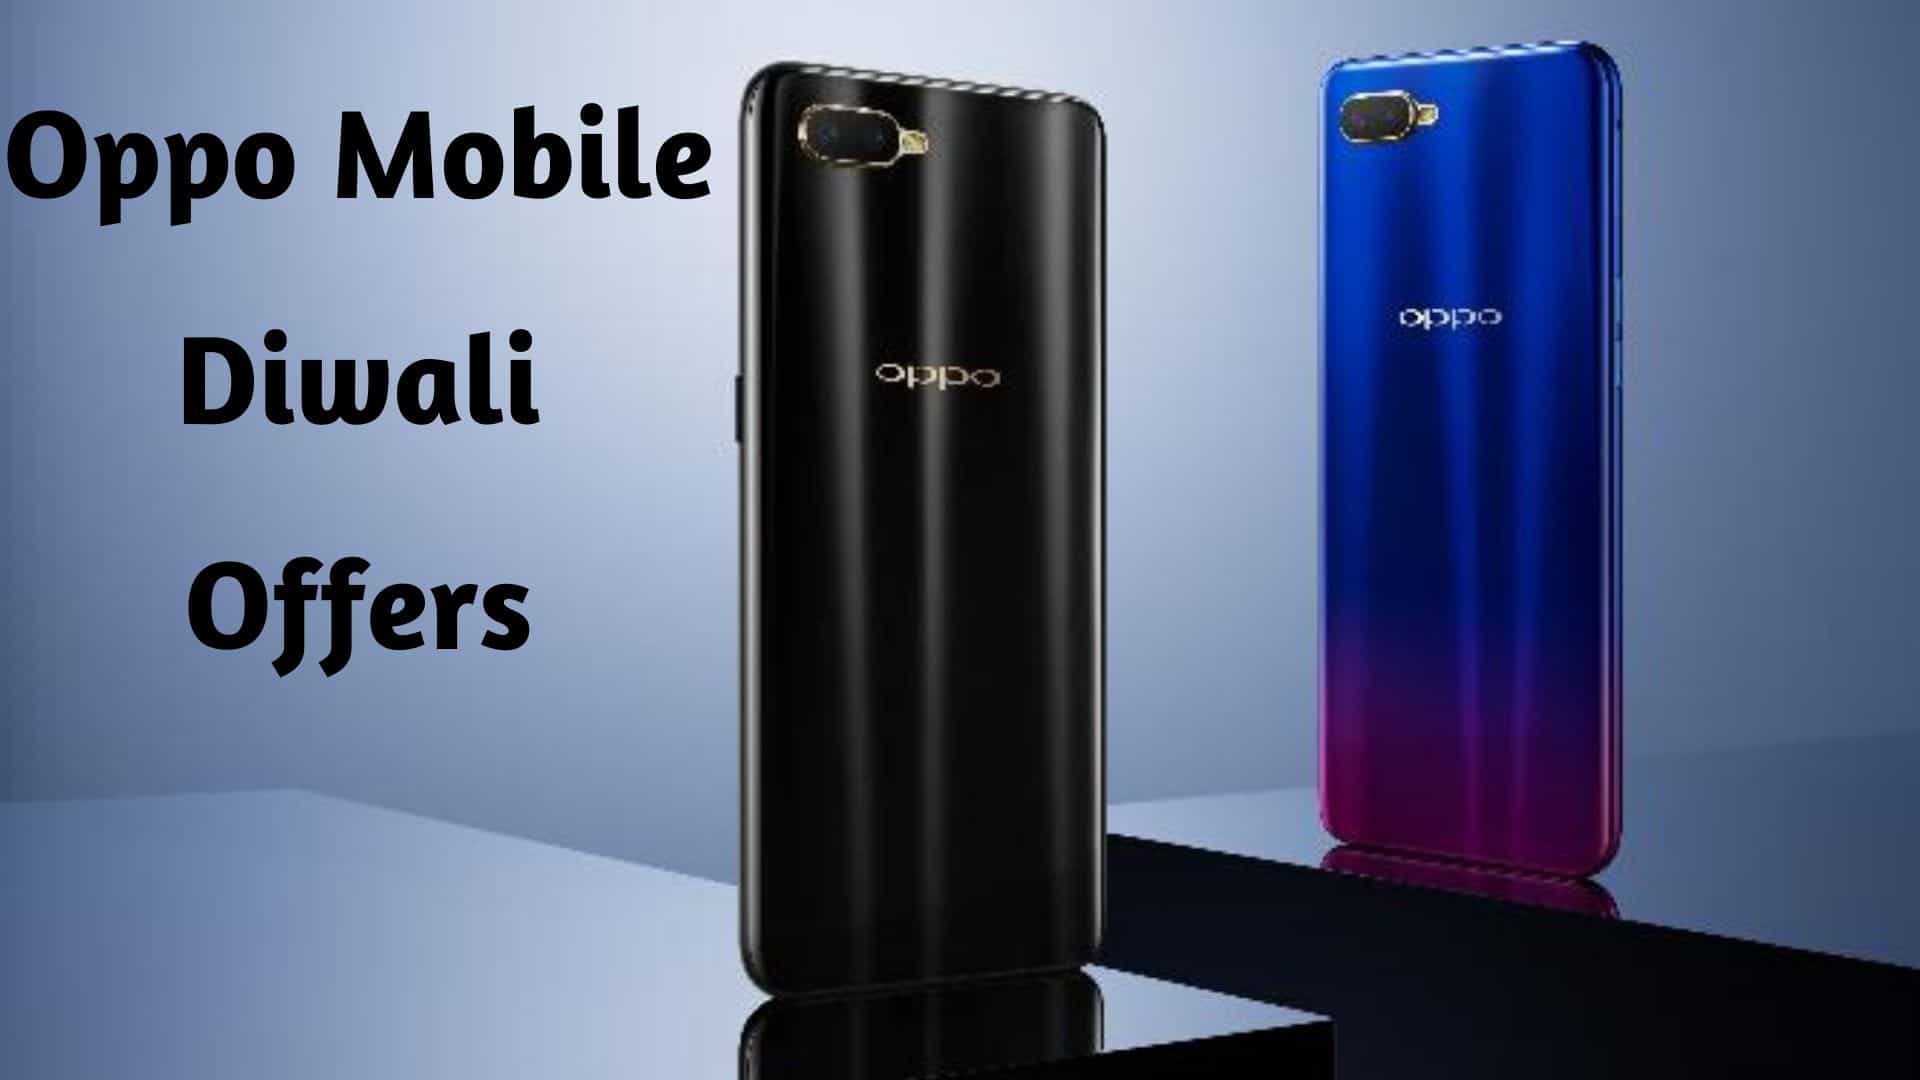 Oppo Mobile Diwali Offers